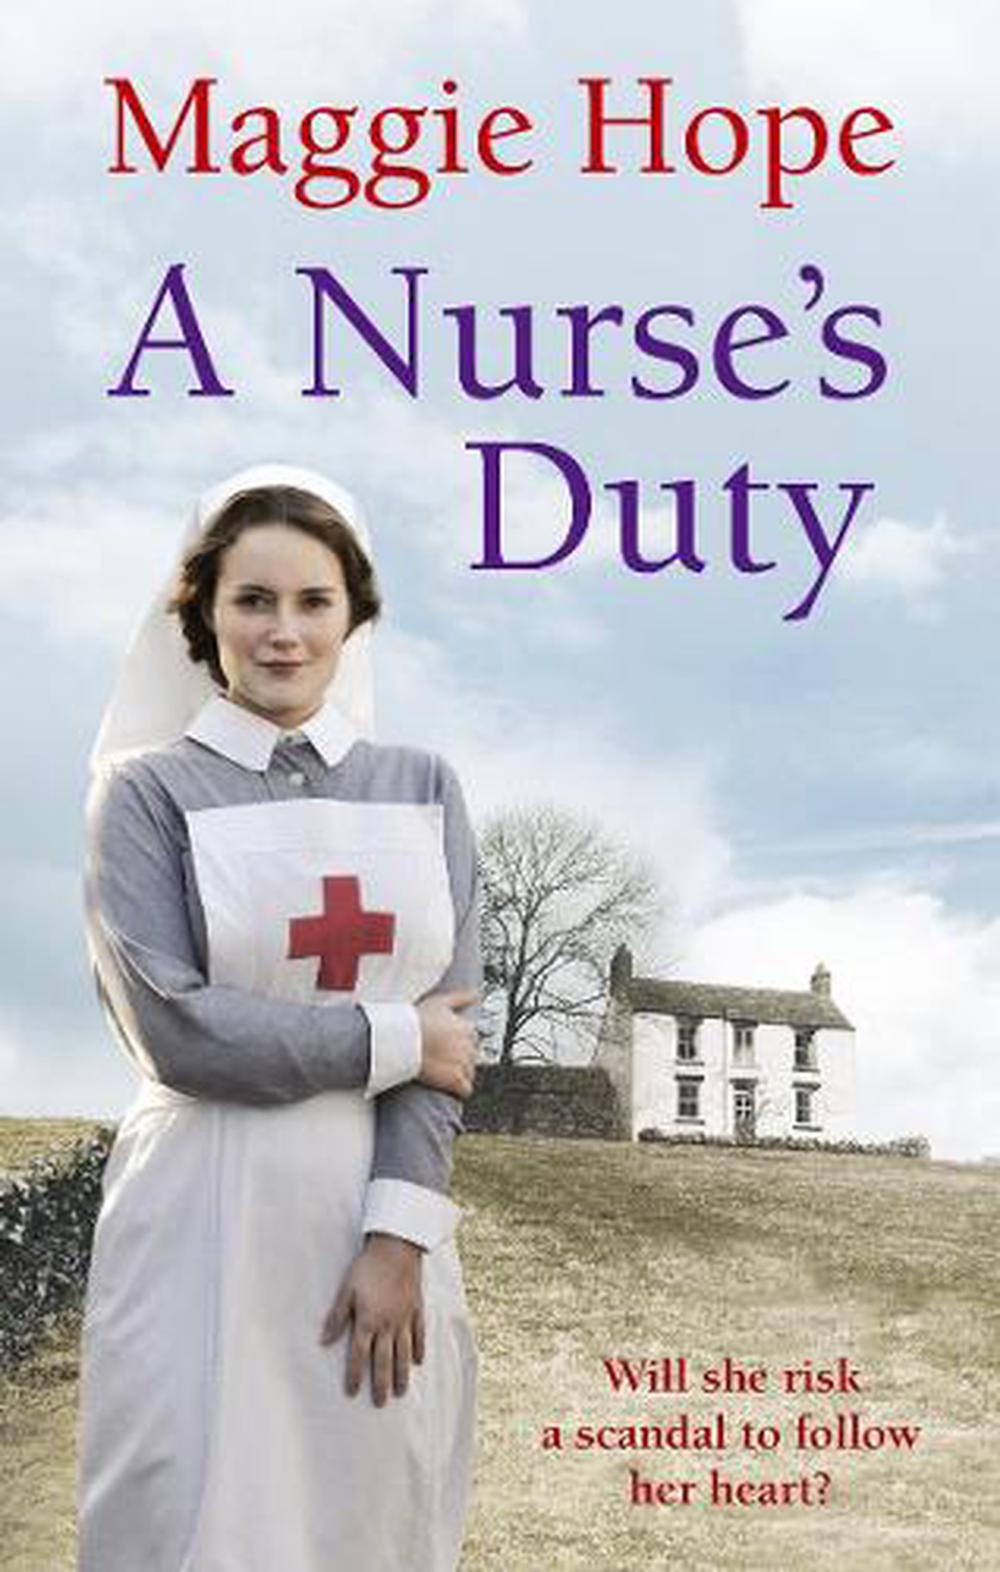 A Nurse's Duty by Maggie Hope (English) Paperback Book Free Shipping